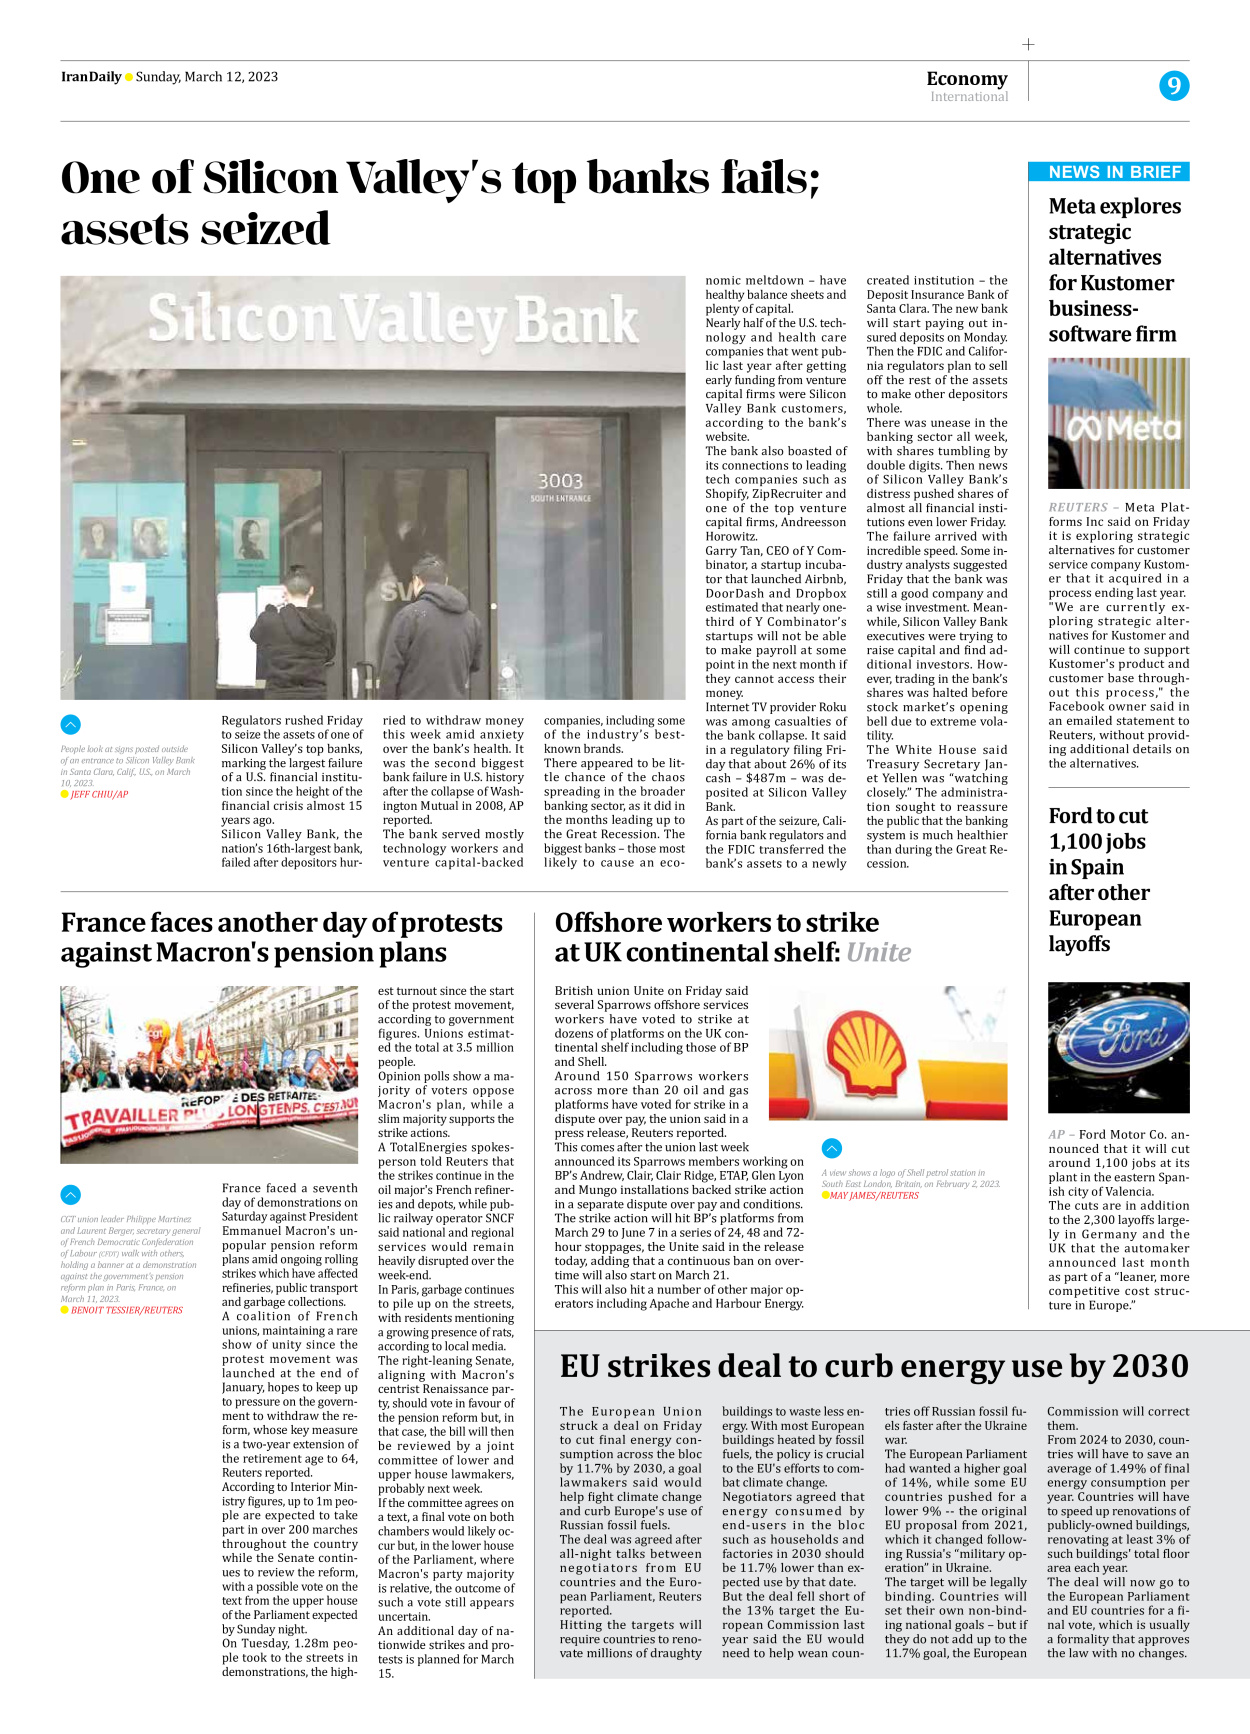 Iran Daily - Number Seven Thousand Two Hundred and Fifty Five - 12 March 2023 - Page 9